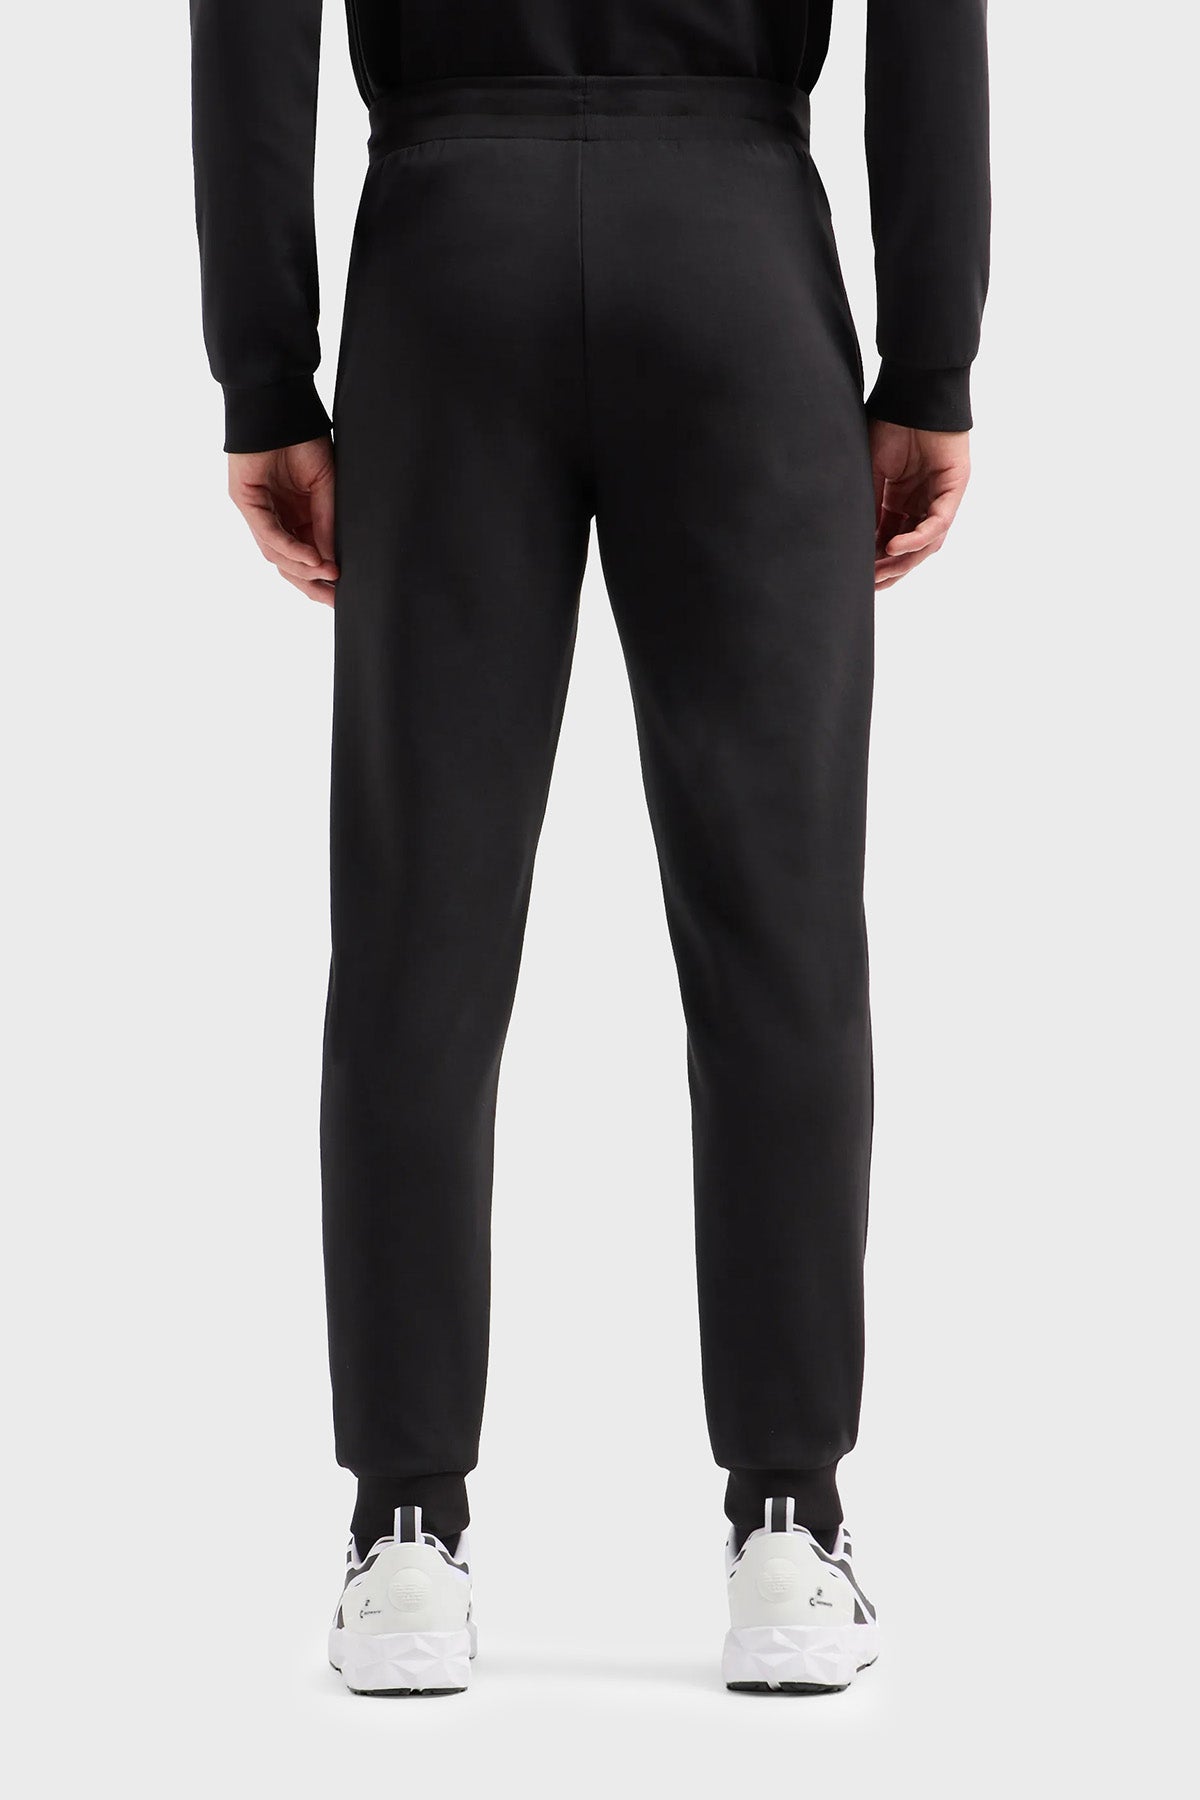 Mens Lux Identity Cuffed Pant